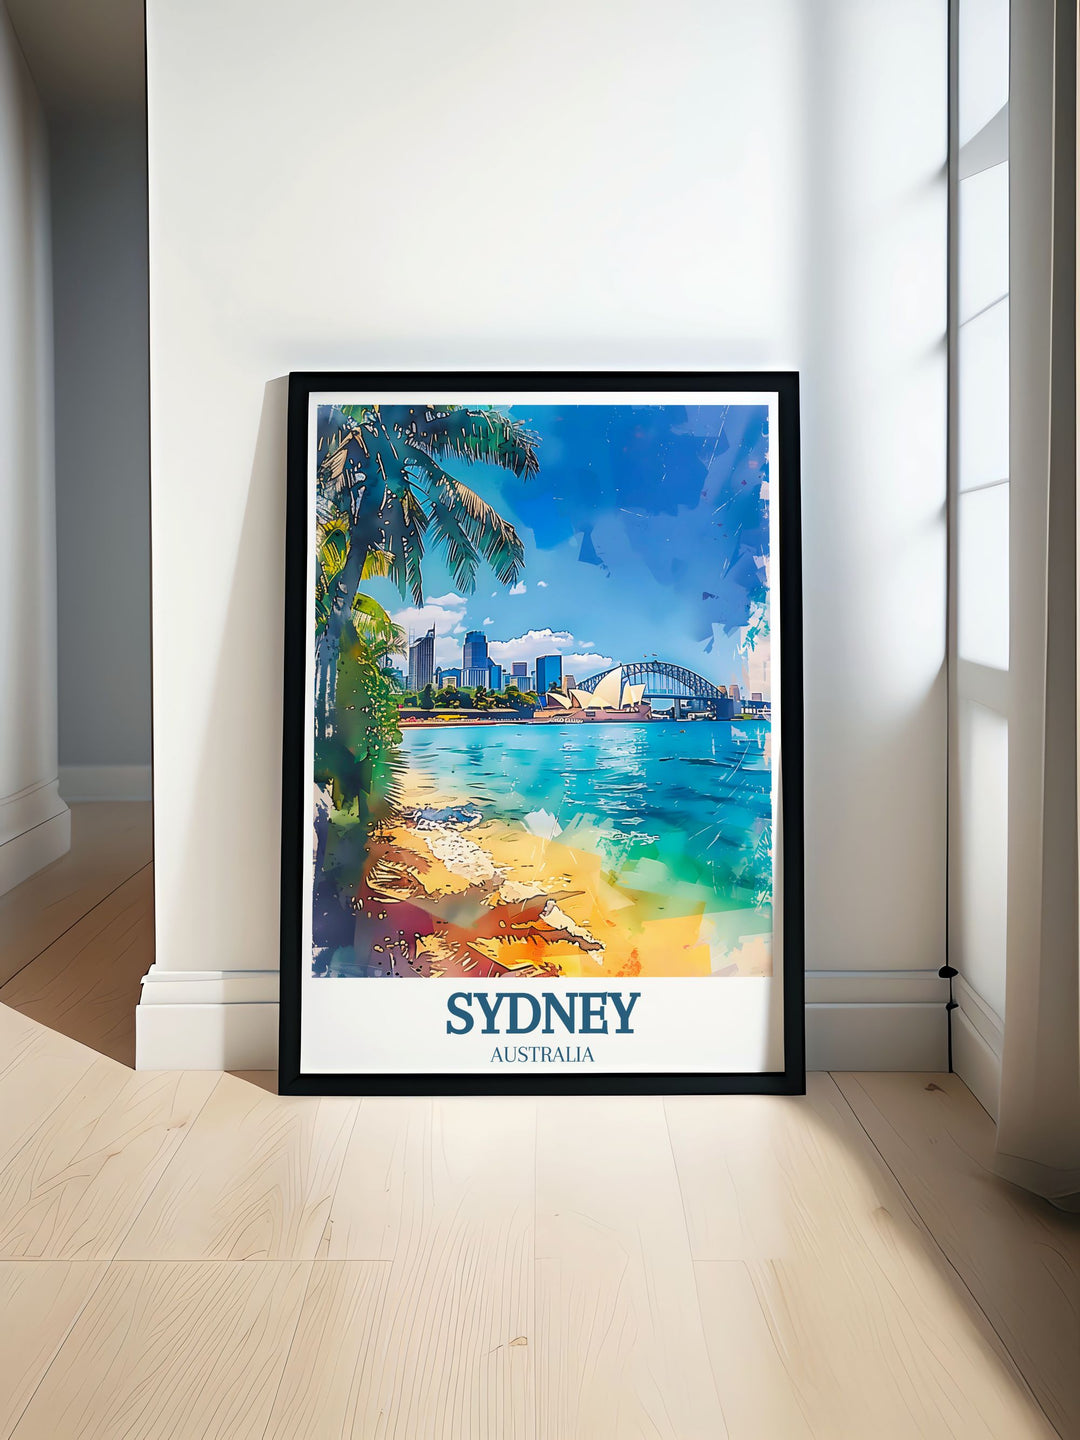 Beautiful Sydney Opera House and Sydney Harbour Bridge artwork capturing the iconic landmarks of Australia perfect for adding a touch of elegance and charm to your home decor or as a unique gift for travel enthusiasts and art lovers